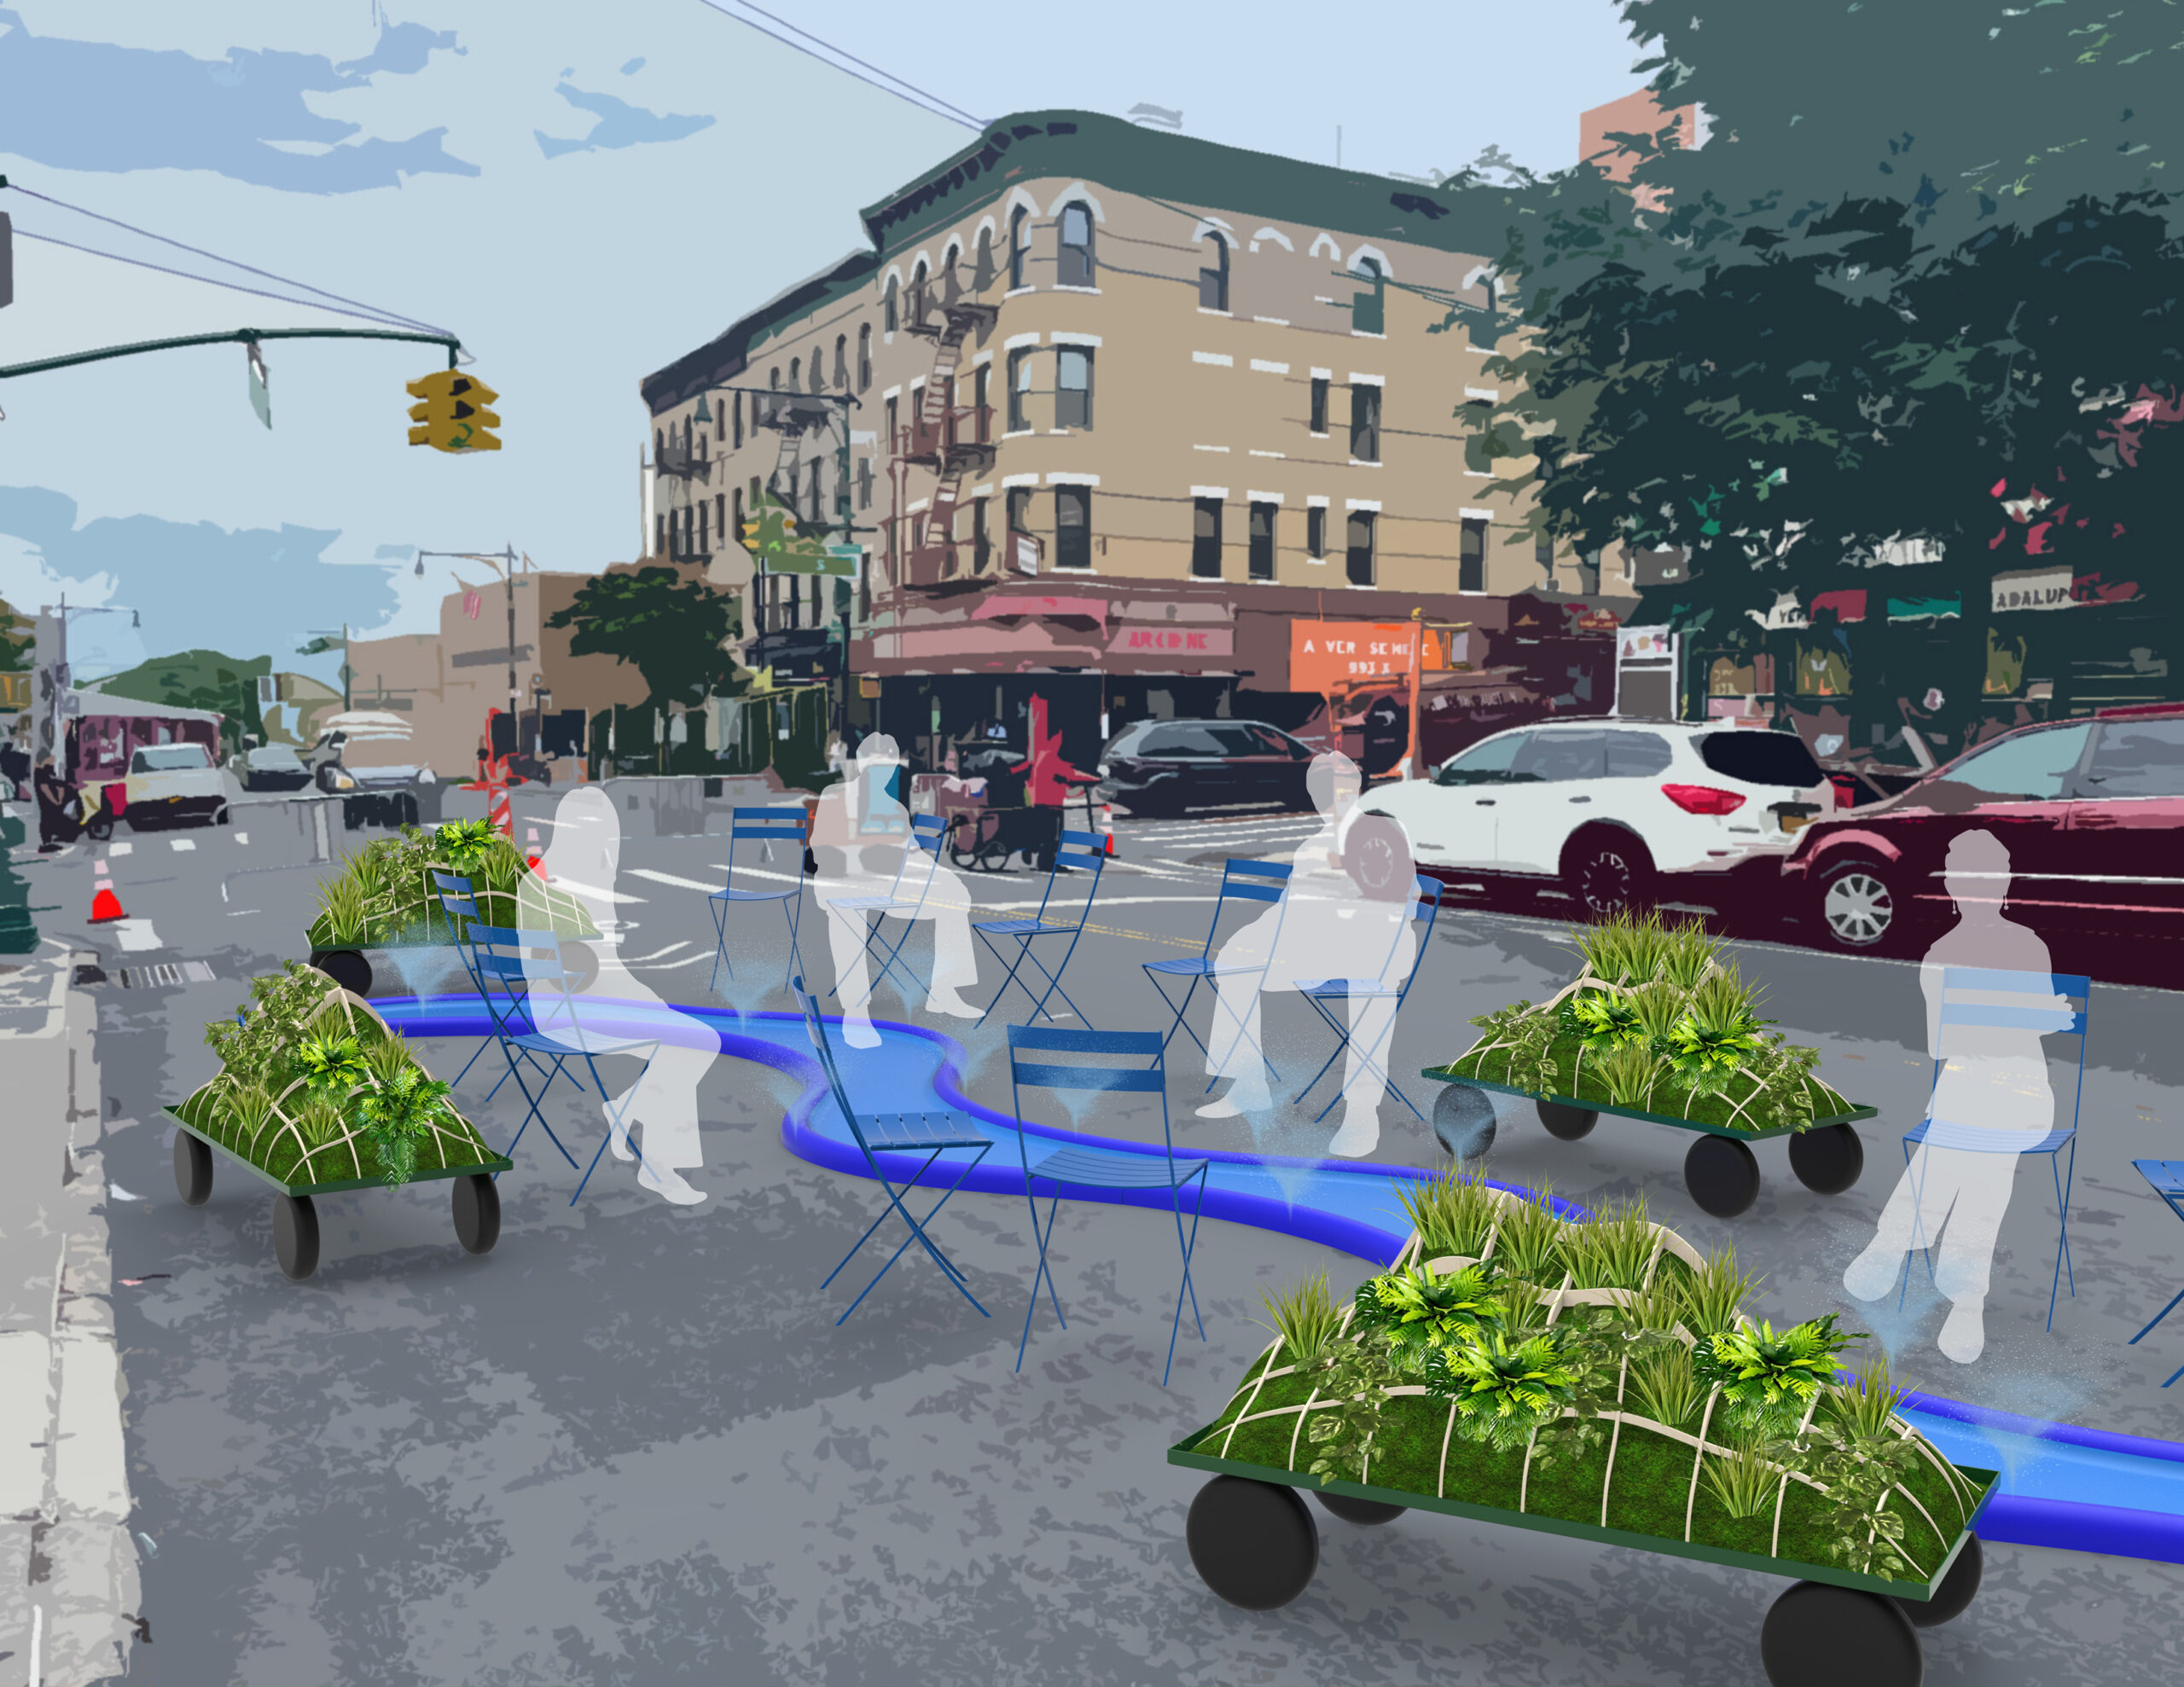 A rendering showing people sitting around blue river fixture and plant carts on the street.